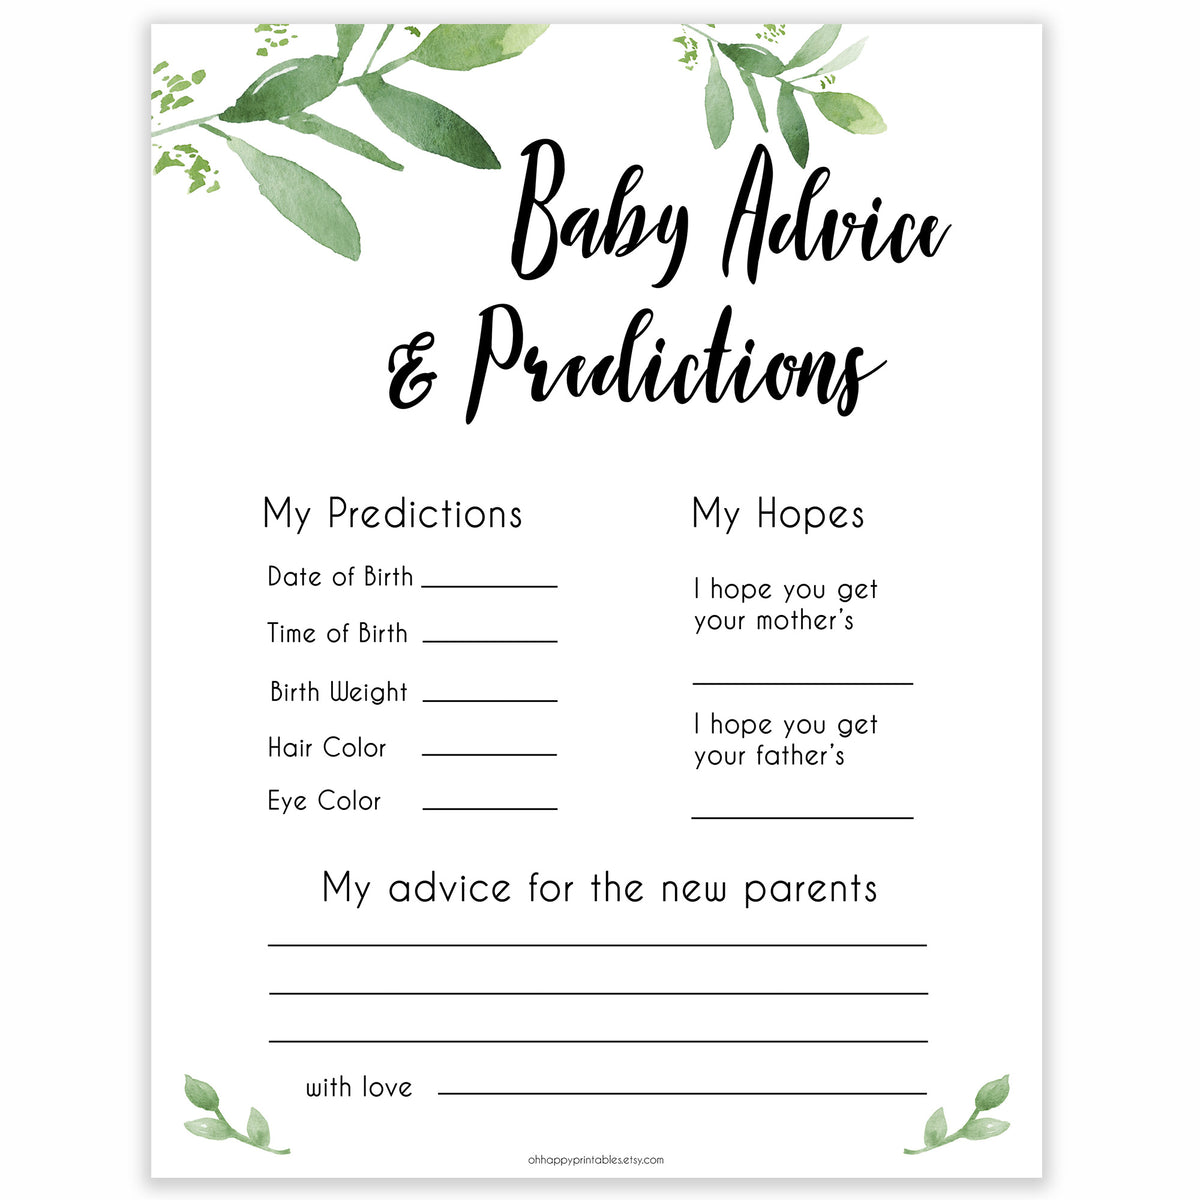 new-baby-advice-predictions-card-botanical-baby-shower-games